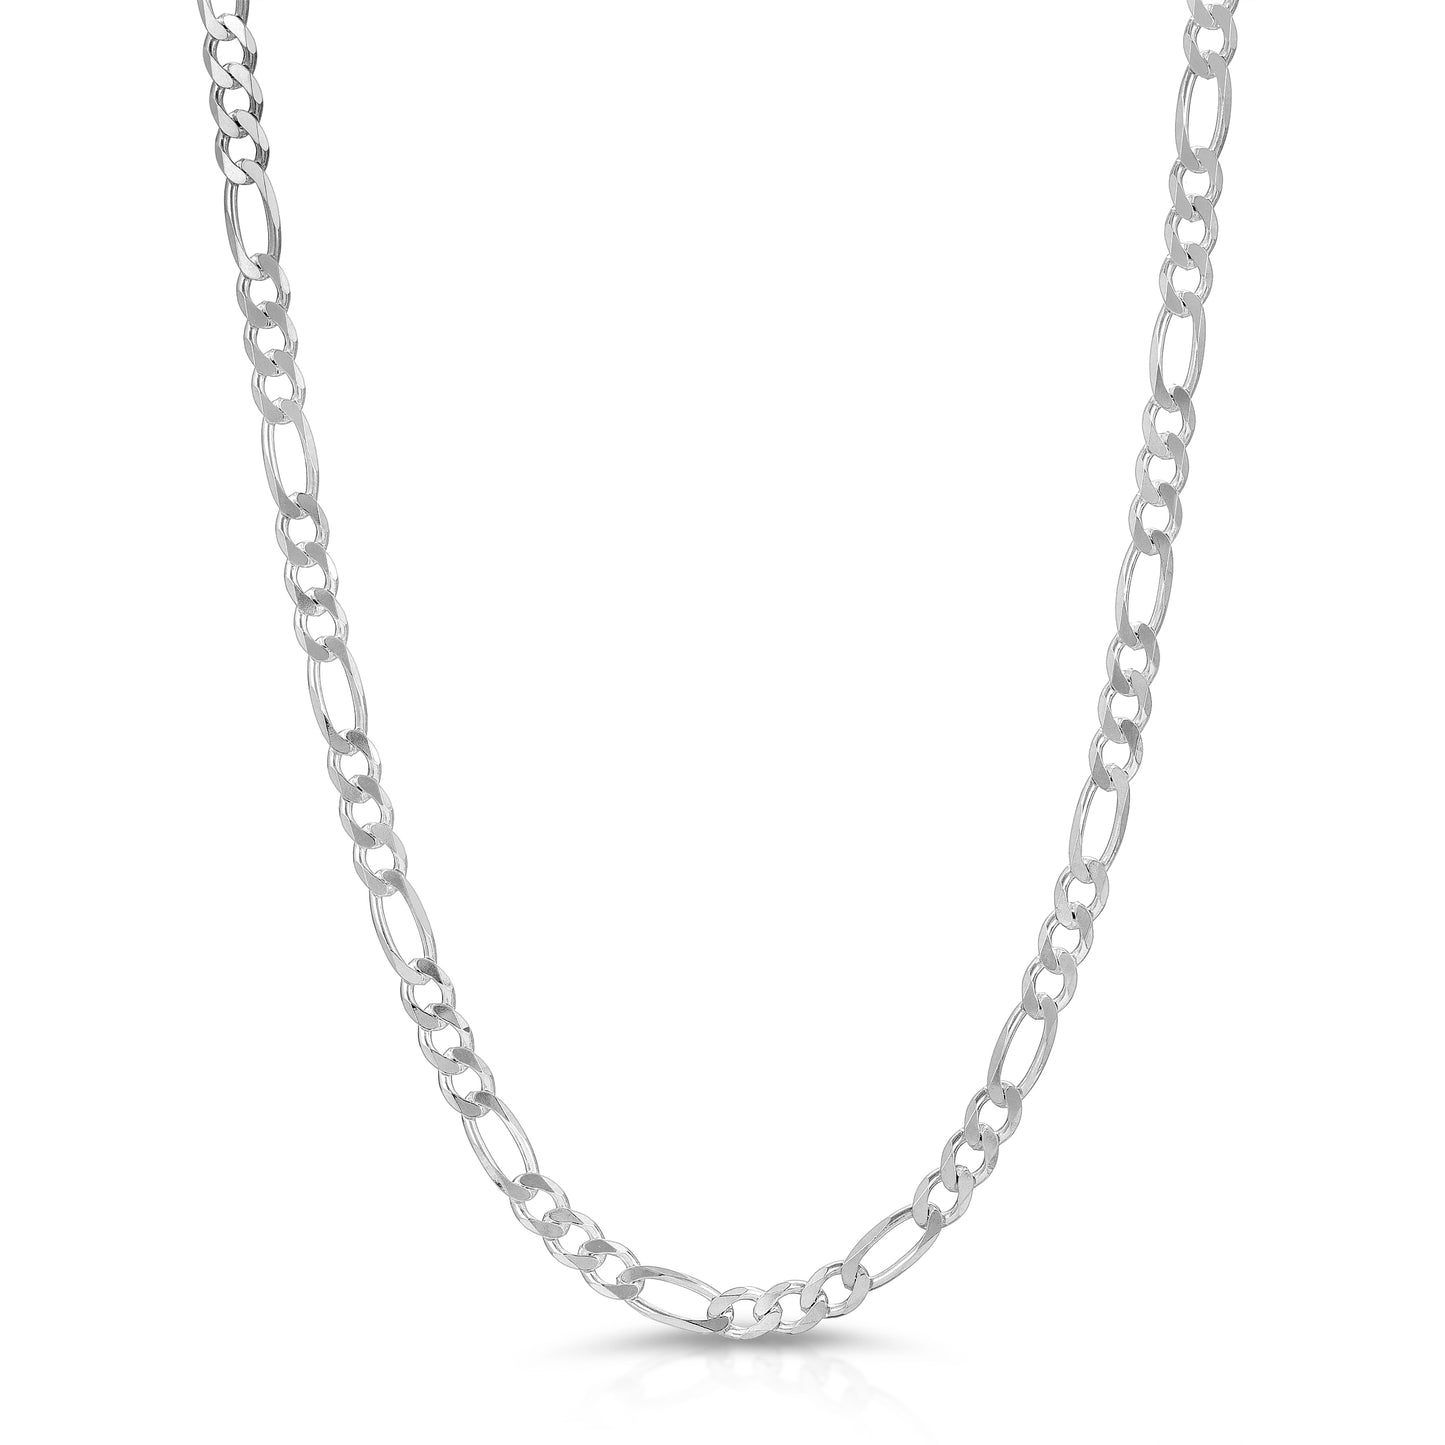 4.7mm Sterling silver 925 Figaro Chain 